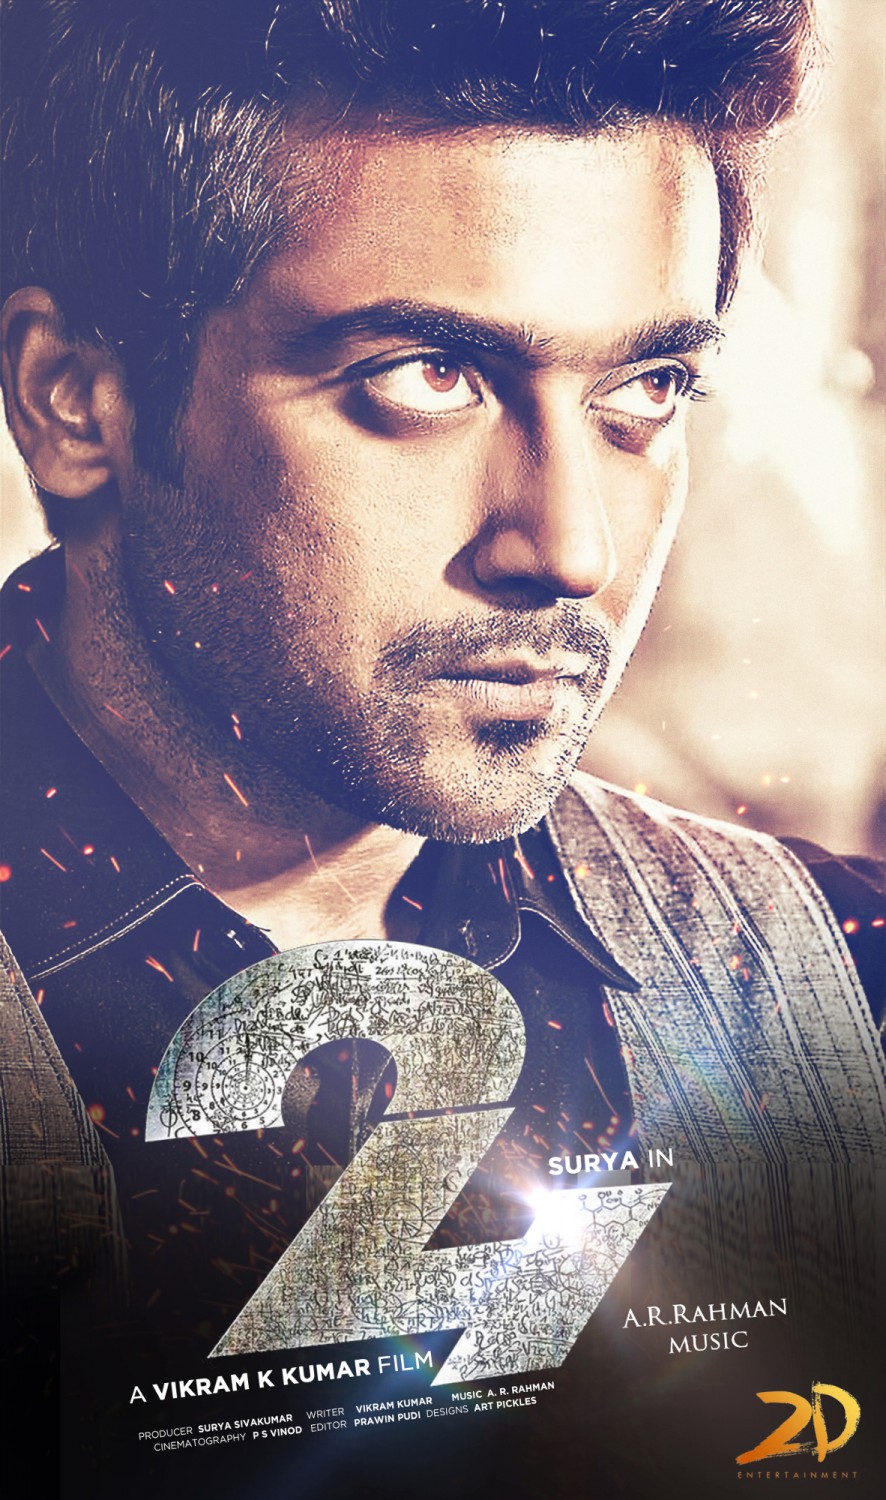 Extra Large Movie Poster Image for 24 